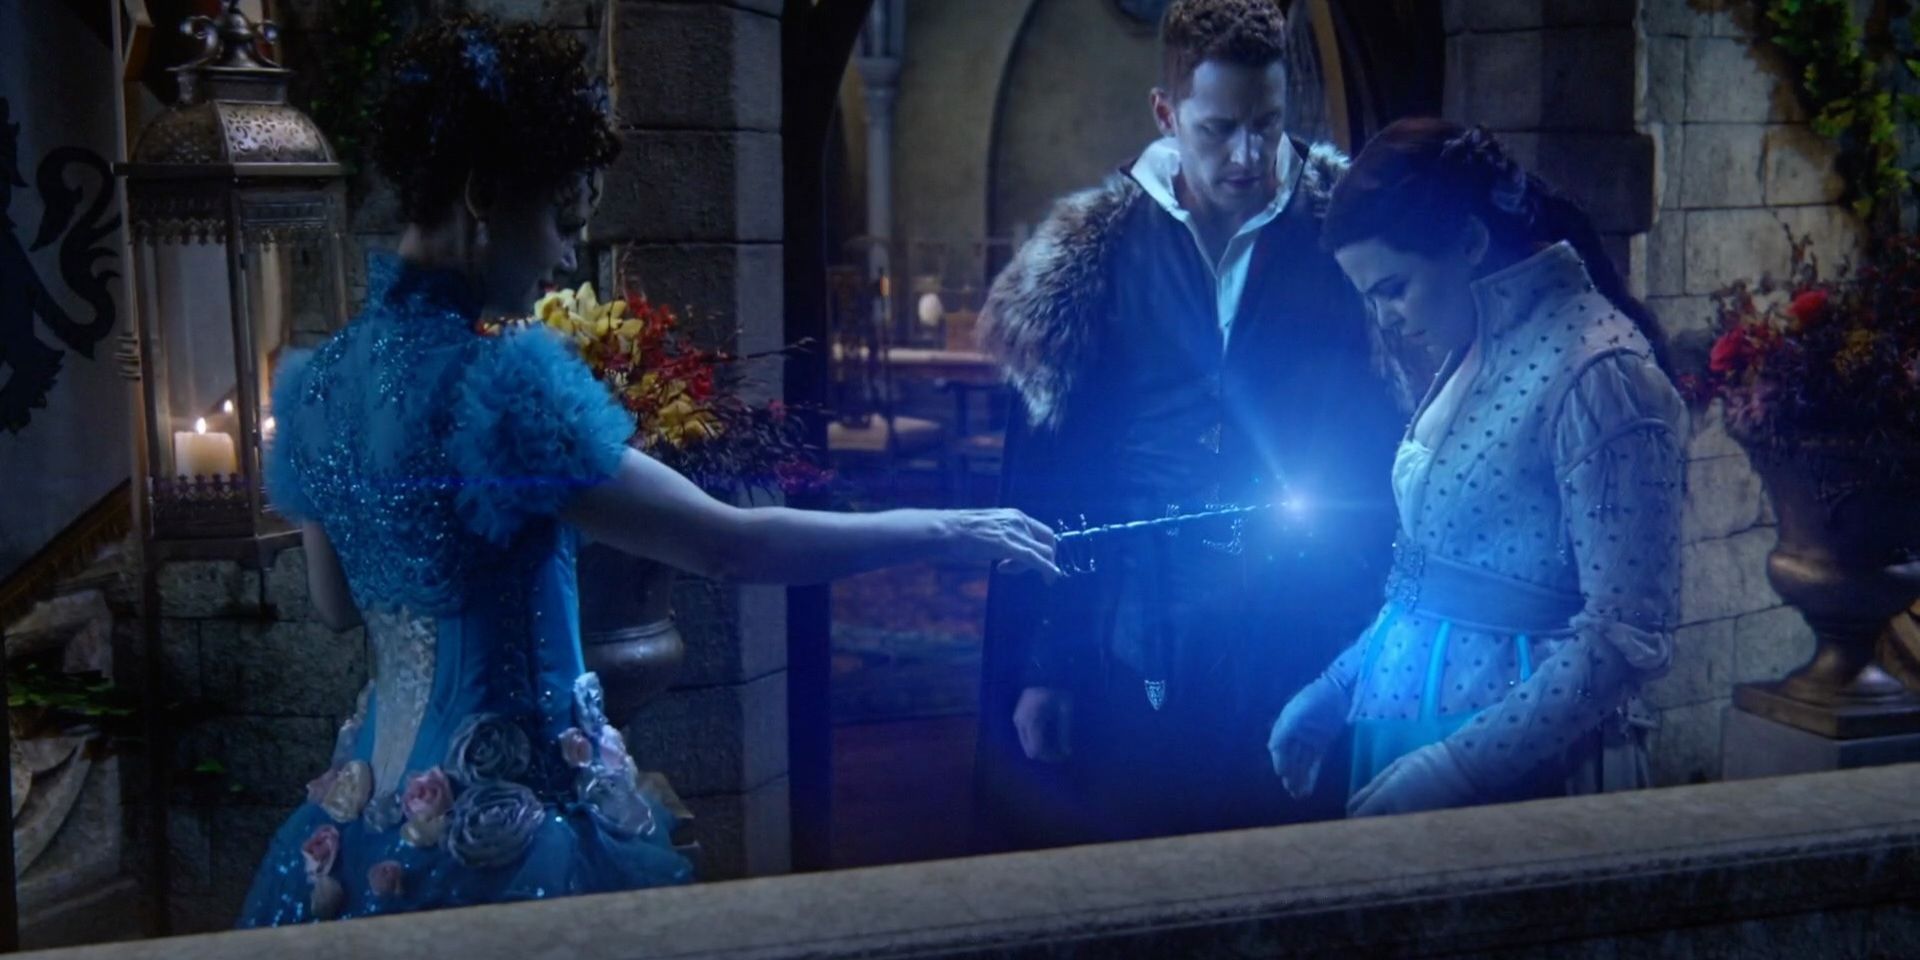 Snow White put song into Emma's heart in Once Upon a Time